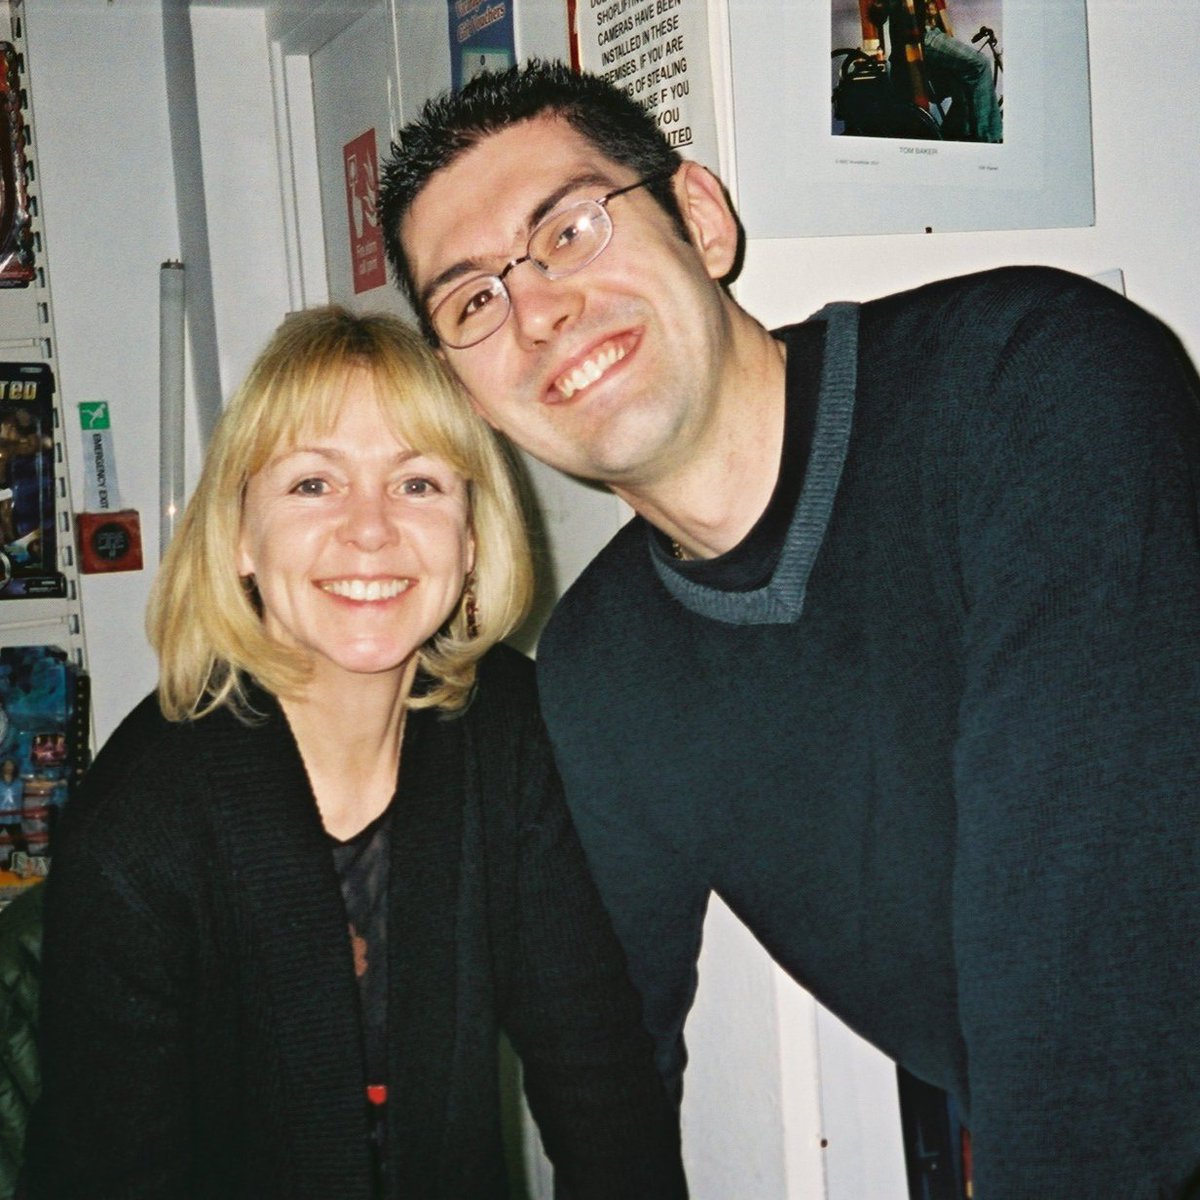 Today's Camping It Up star is Troughton era companion, the always amazing Wendy Padbury. Wendy is gorgeous and fun and we got a great photo in the cramped conditions at Tenth Planet at the start of 2003. She's tiny compared to me, so a back to back shot wouldn't have worked!